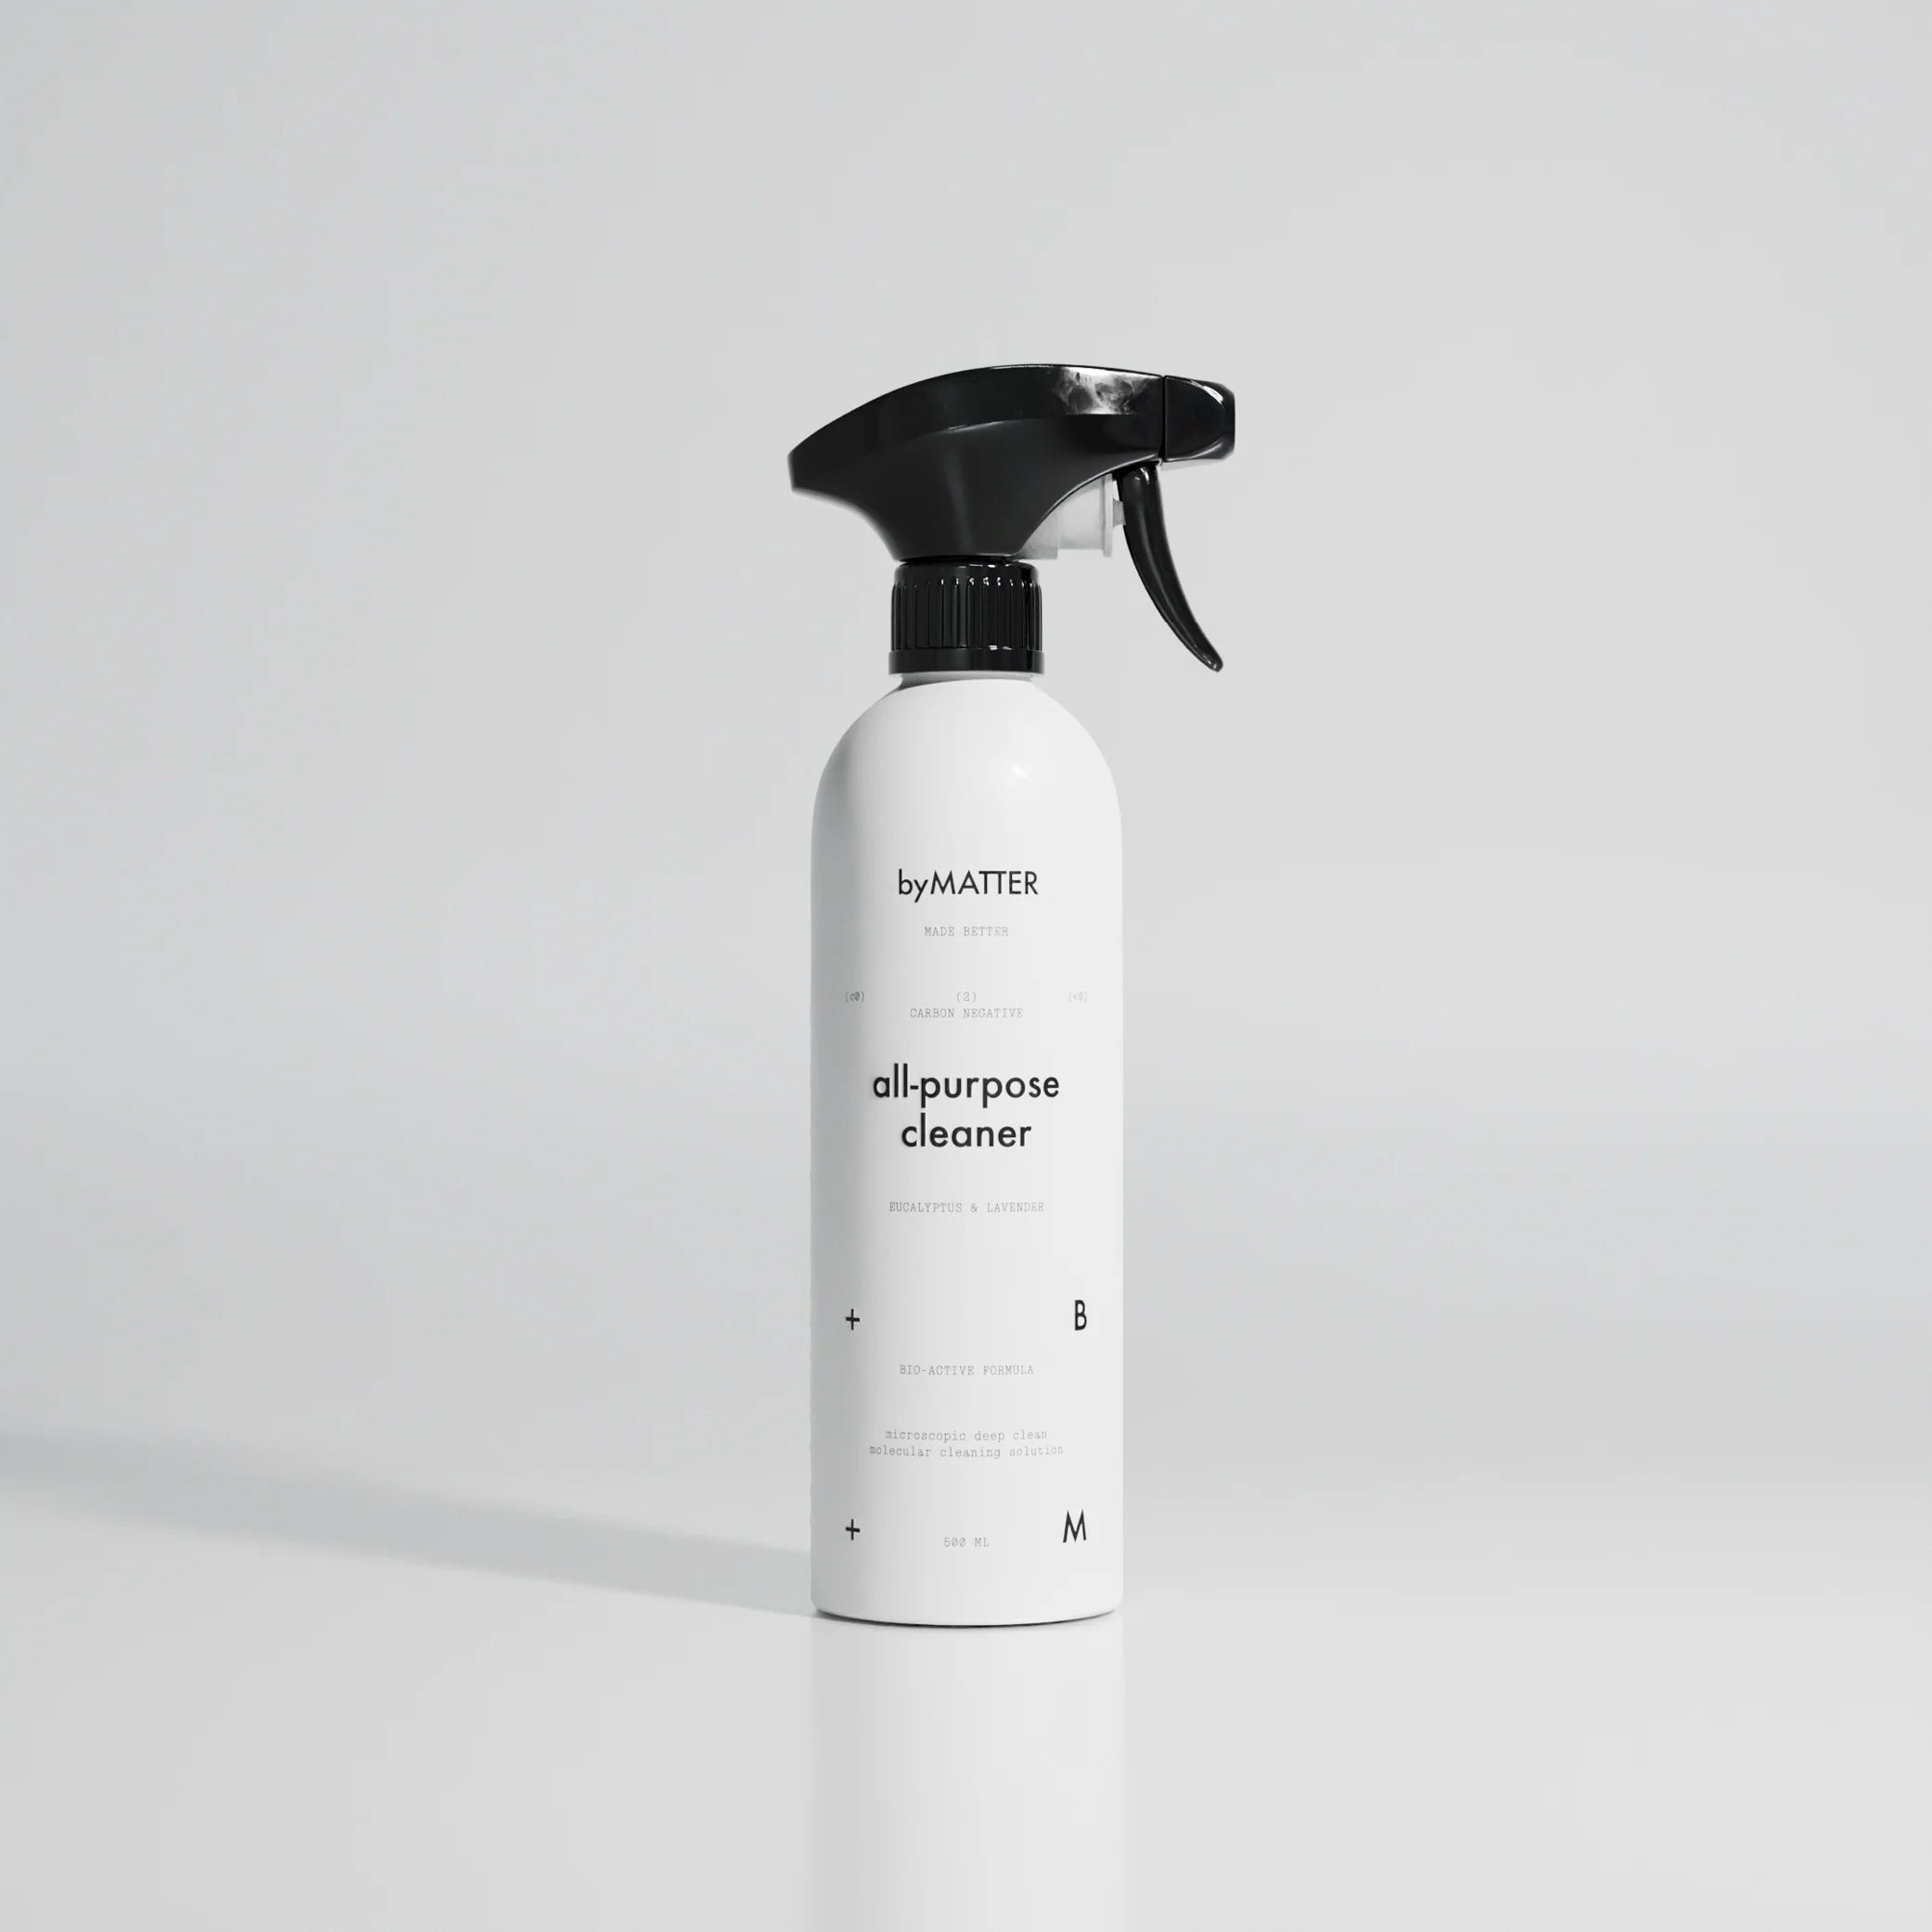 all-purpose cleaner | byMATTER